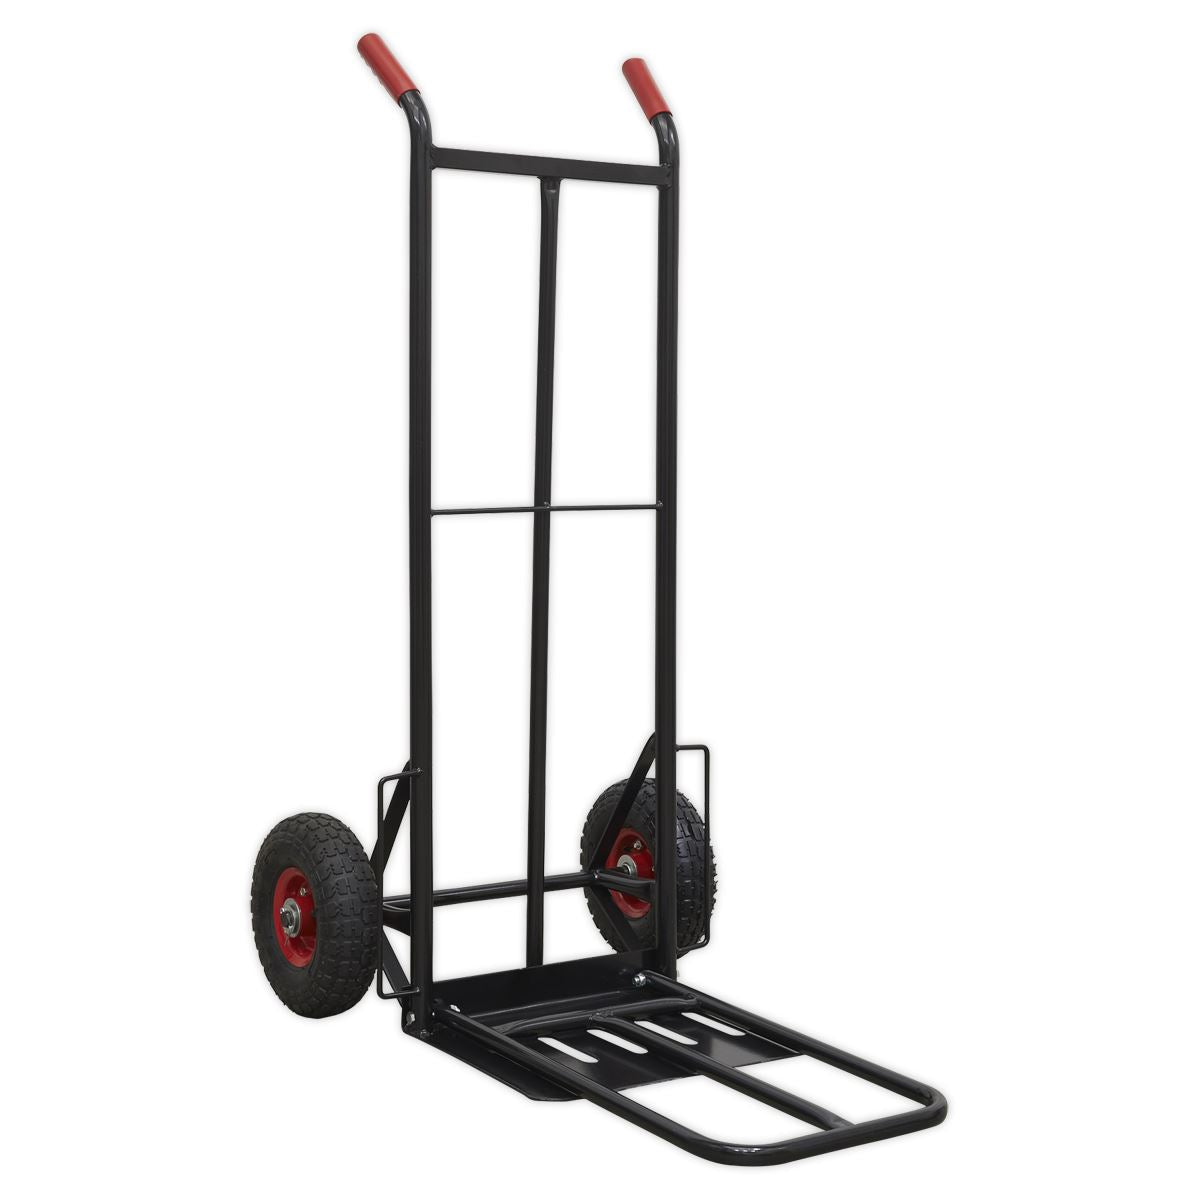 Sealey Premier Heavy-Duty Sack Truck with PU Tyres 300kg Capacity